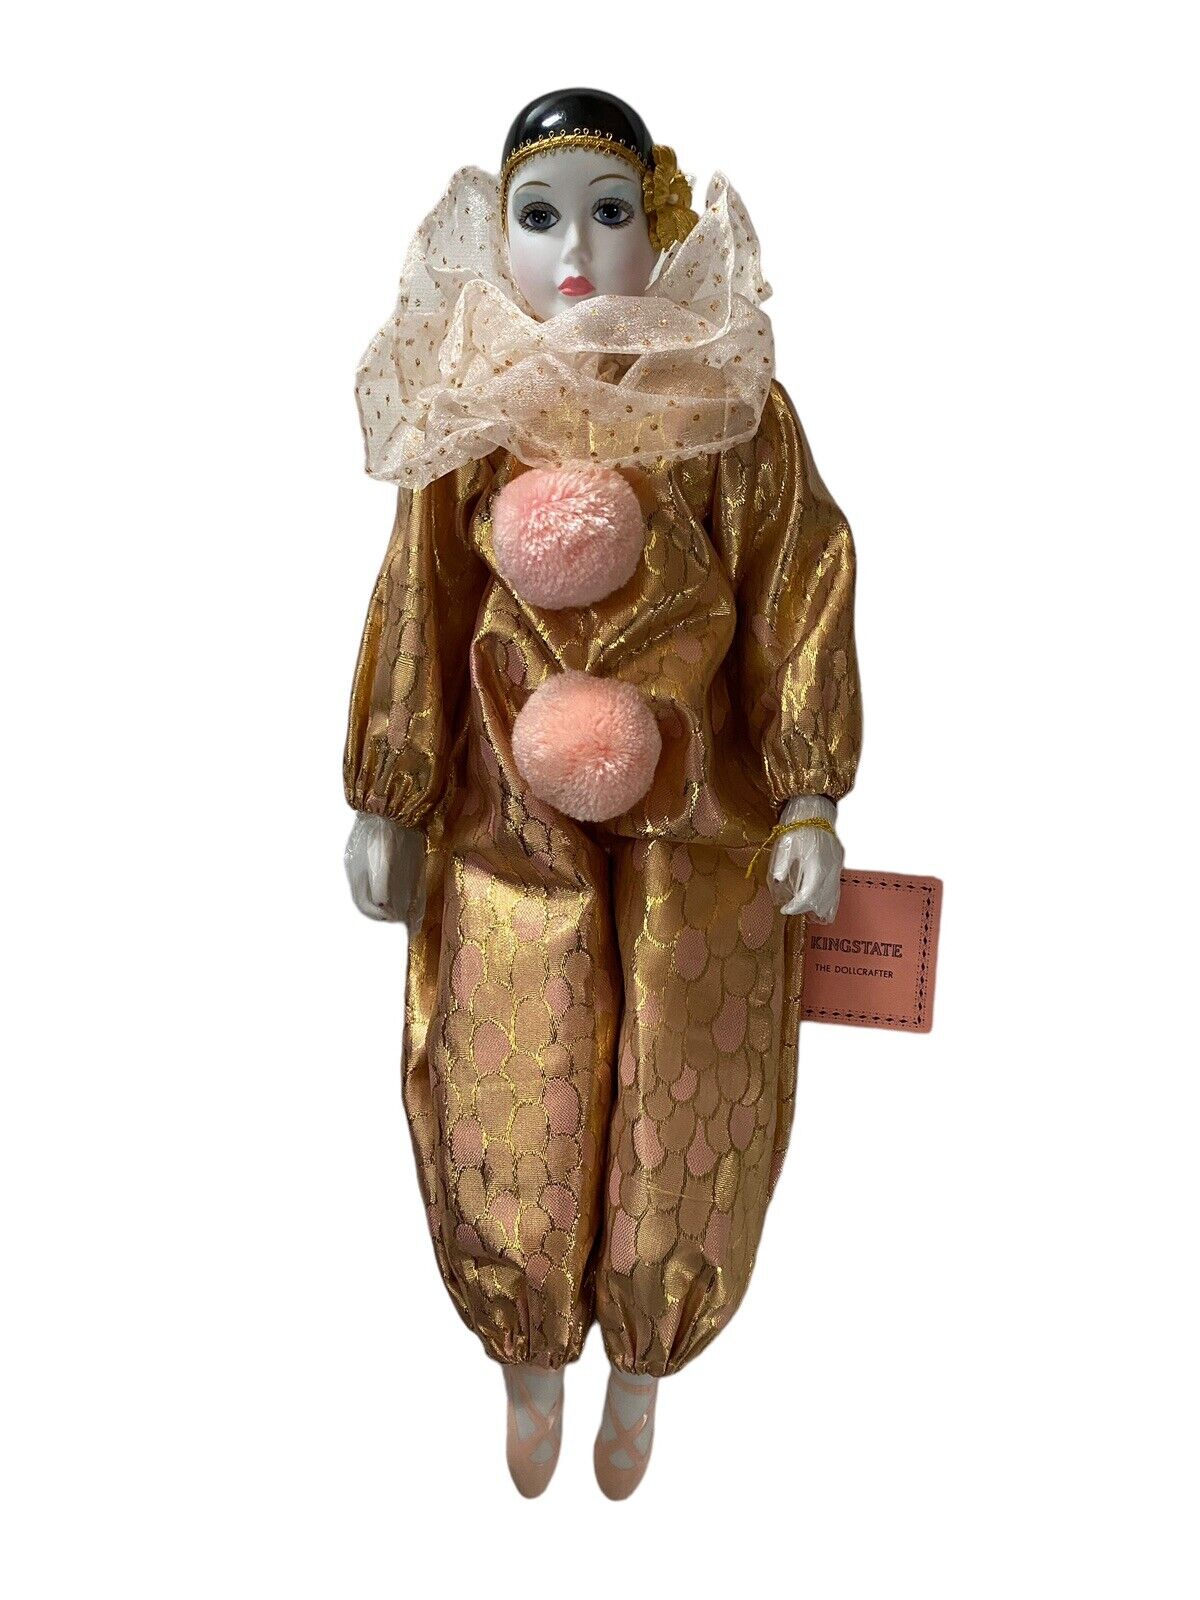 Kingstate Pierrot Jester Harlequin Doll Hand Painted Bisque Porcelain